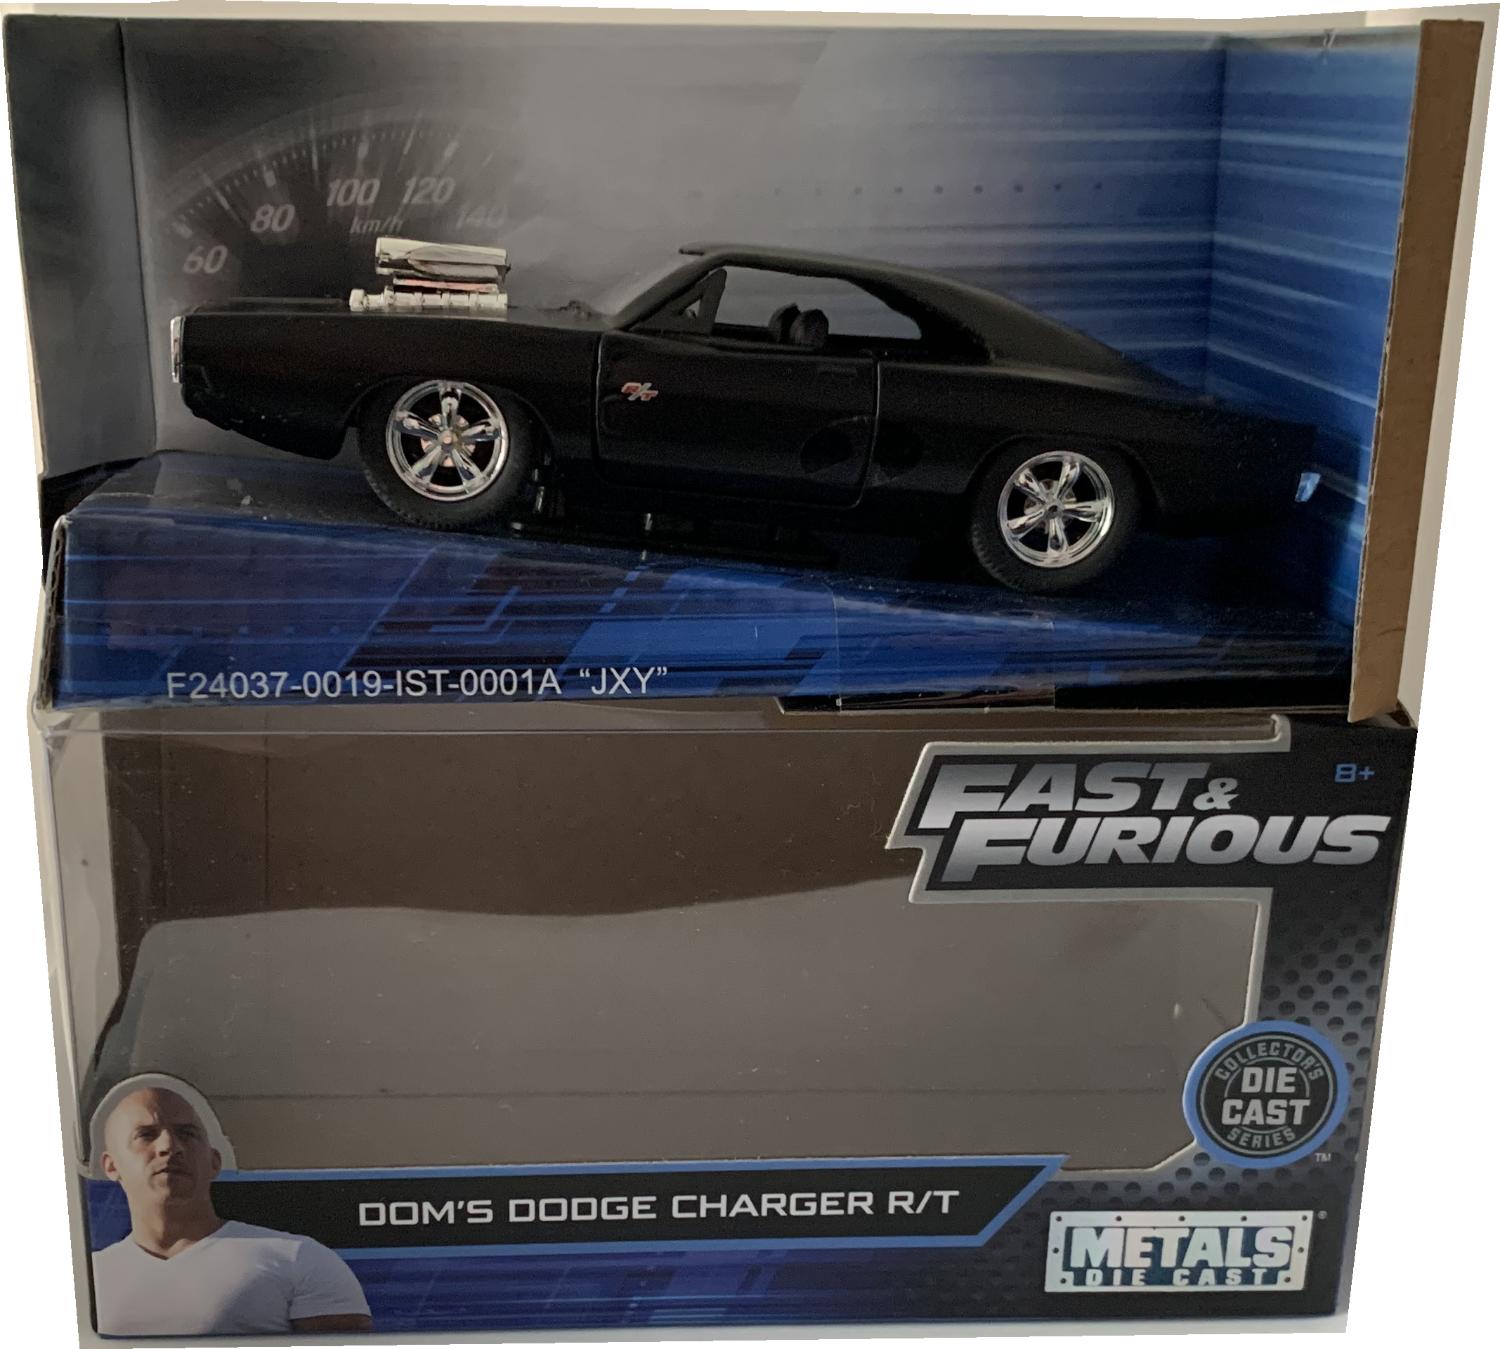 ast and Furious Dom’s Dodge Charger R/T 1970 in matt black 1:32 scale model from Jada Toys